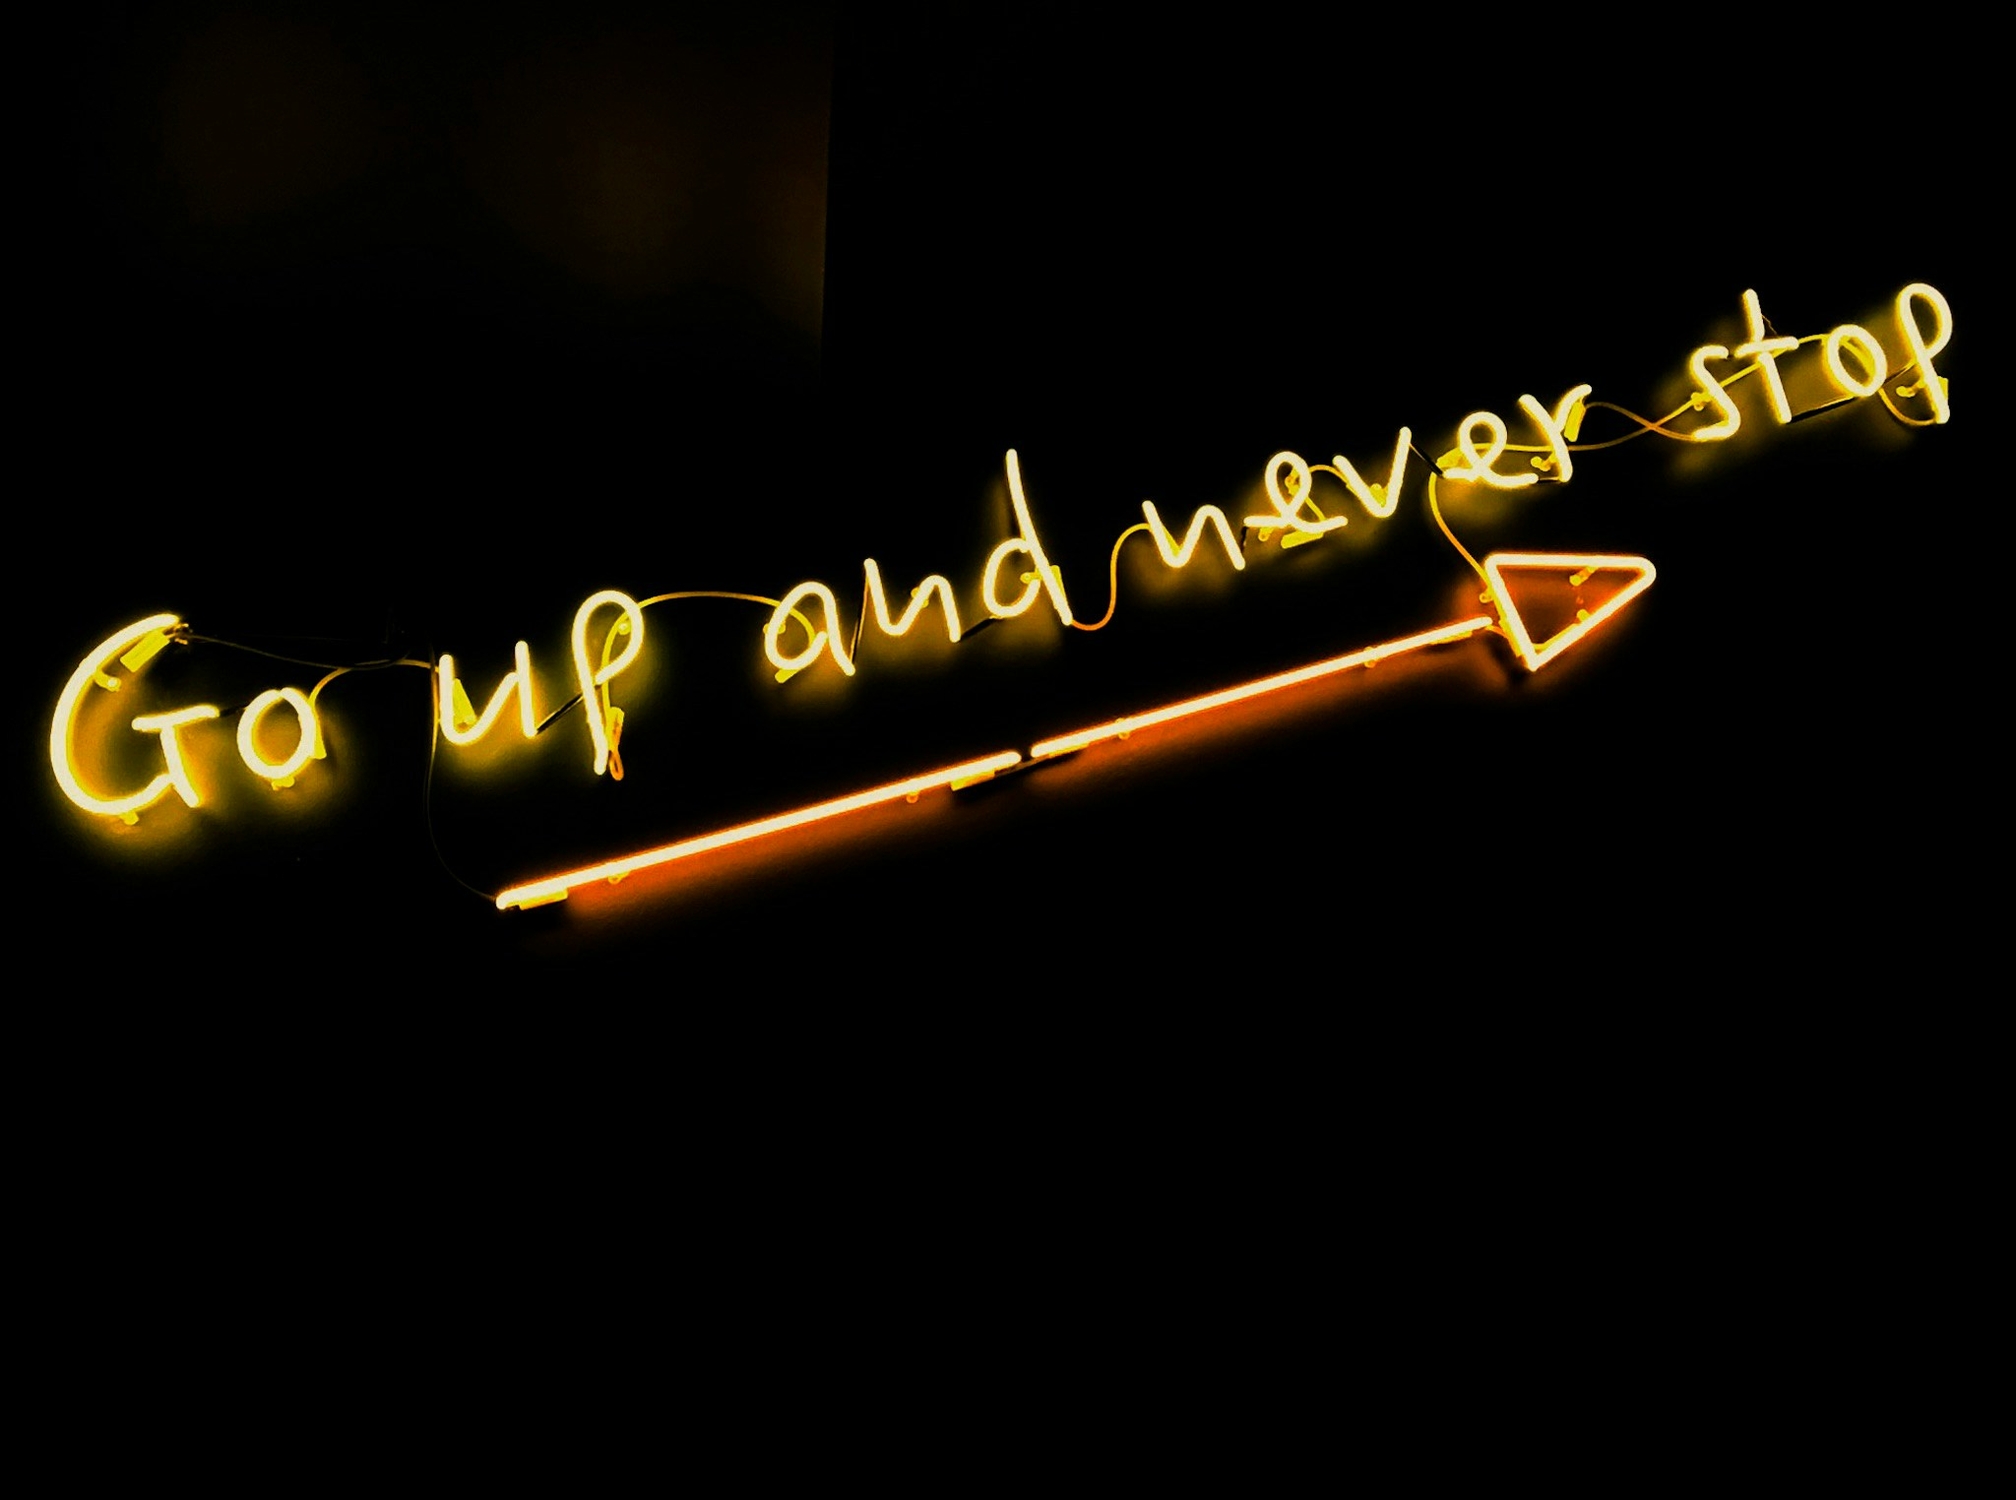 Neon sign saying Go Up and Never Stop